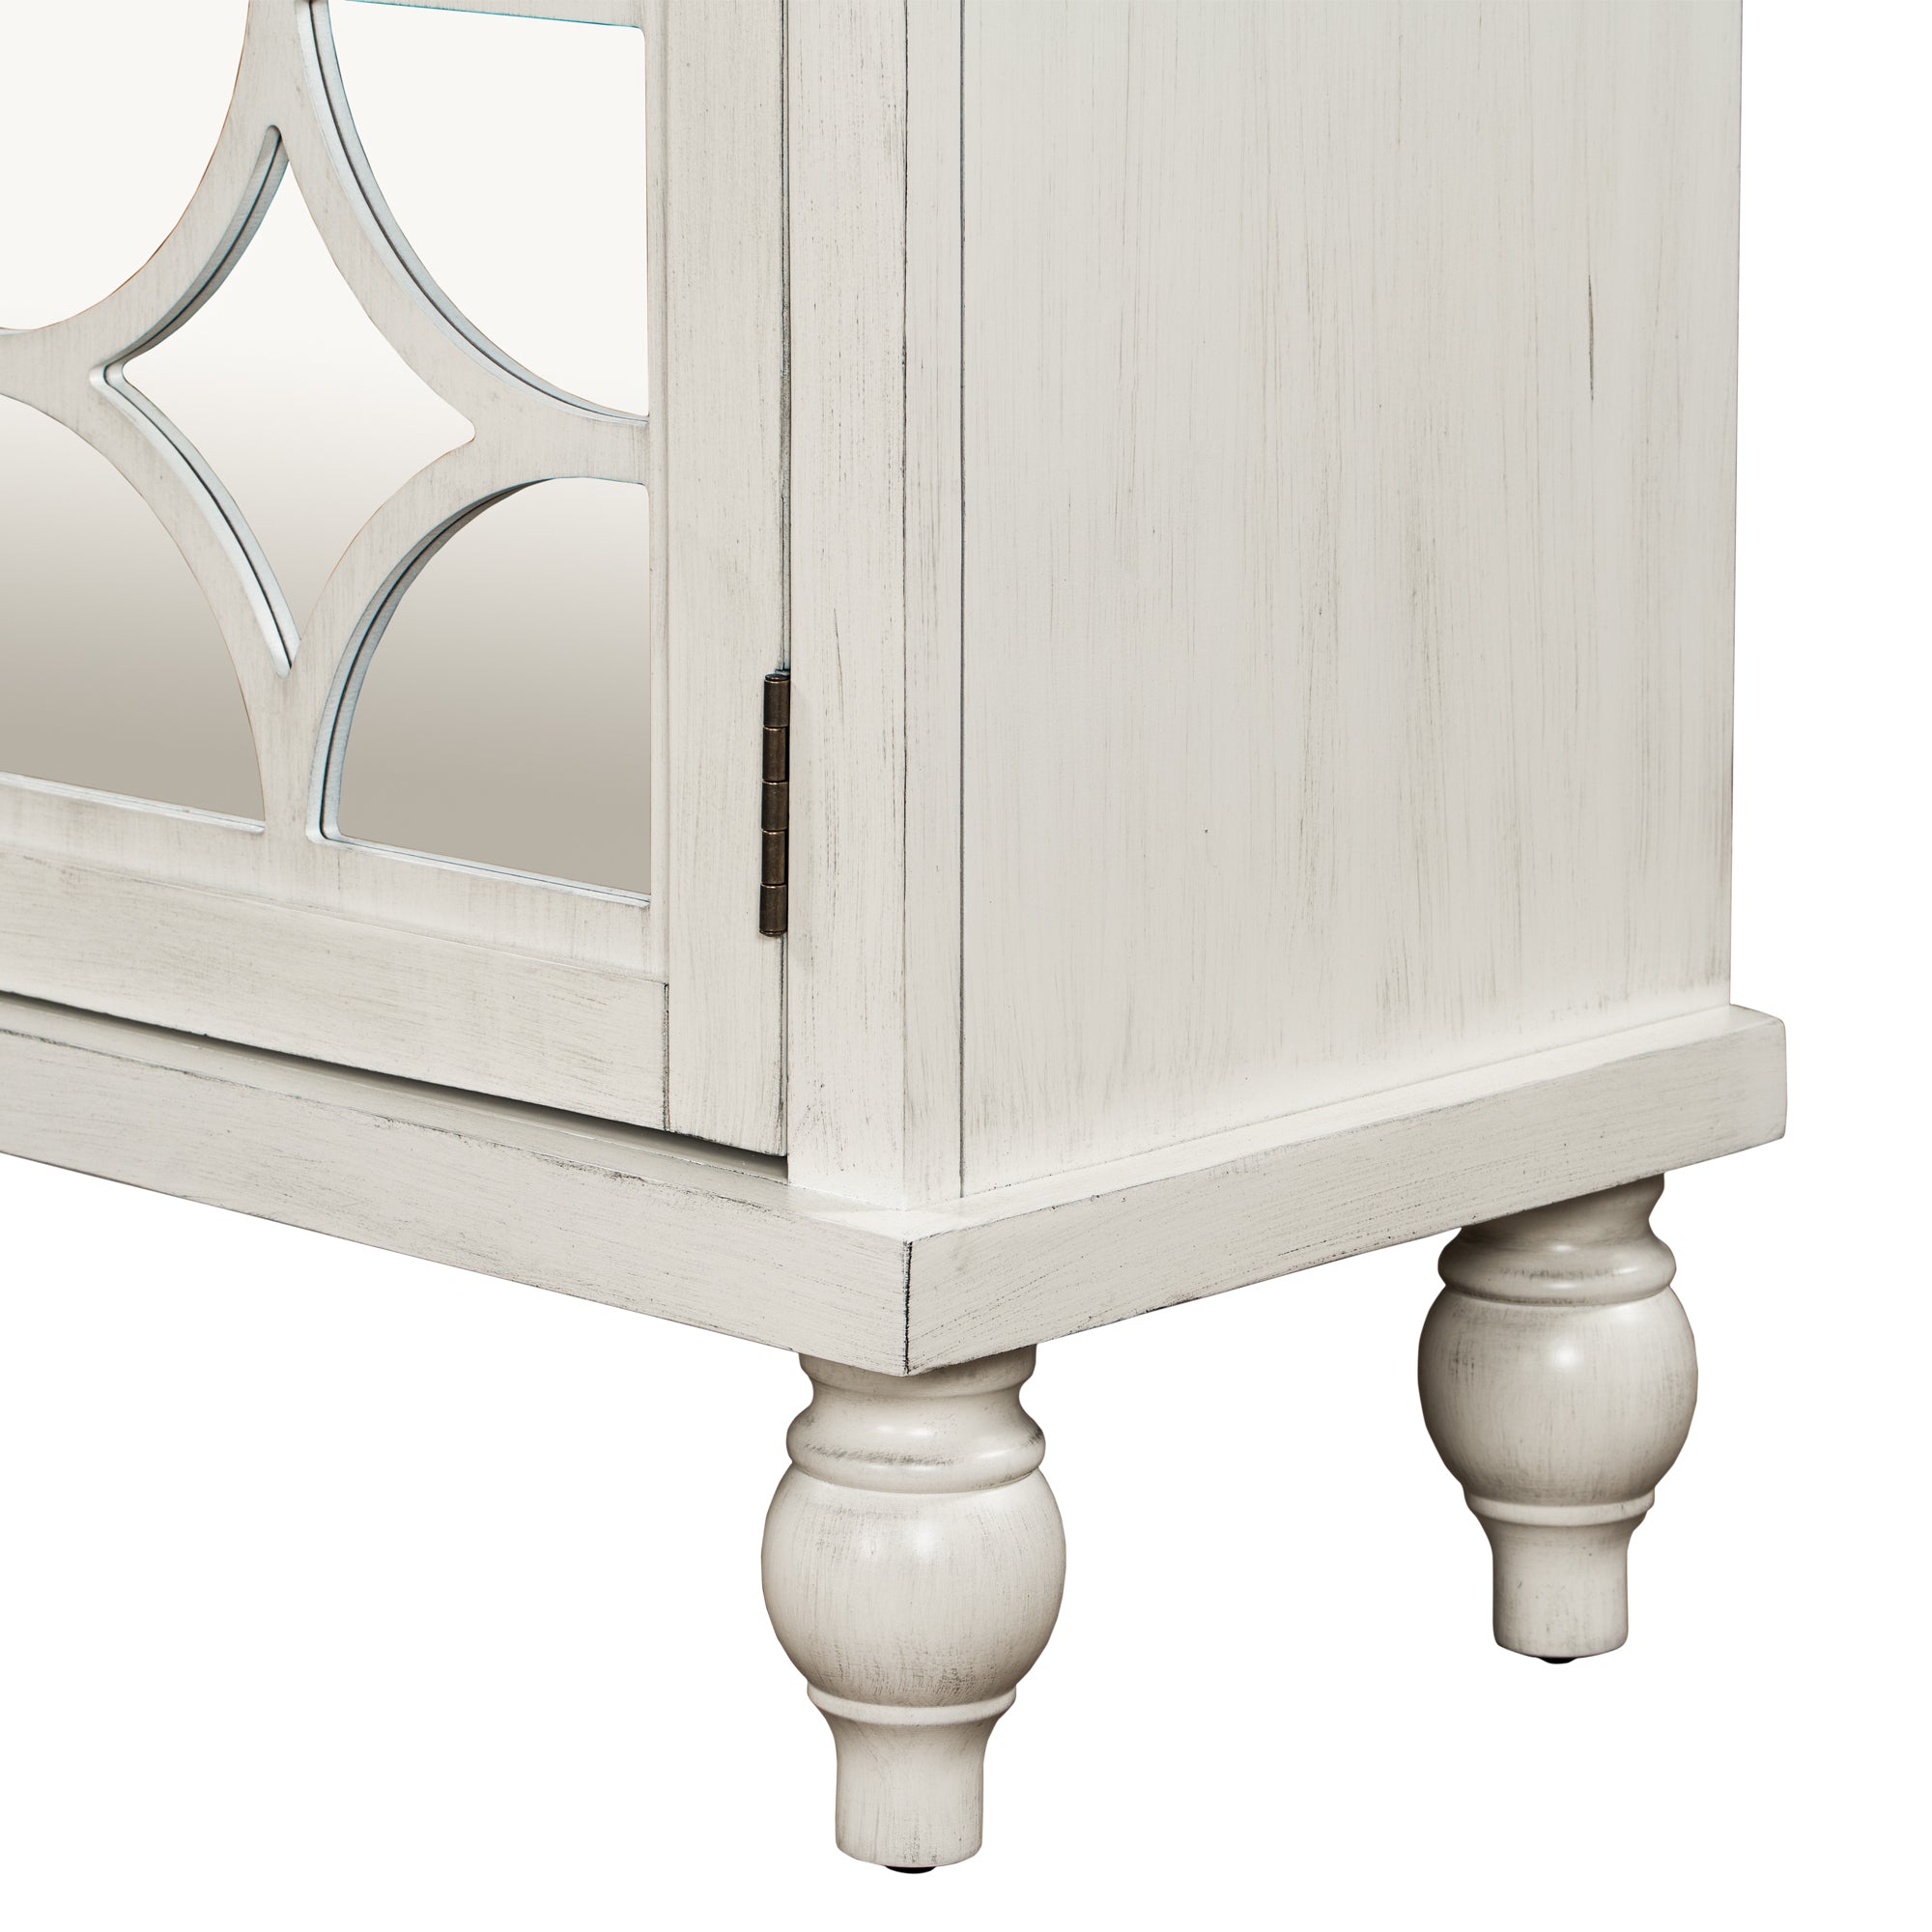 Free Standing Wood Sideboard Storage Cabinet with Doors and Adjustable Shelf ( Antique White)